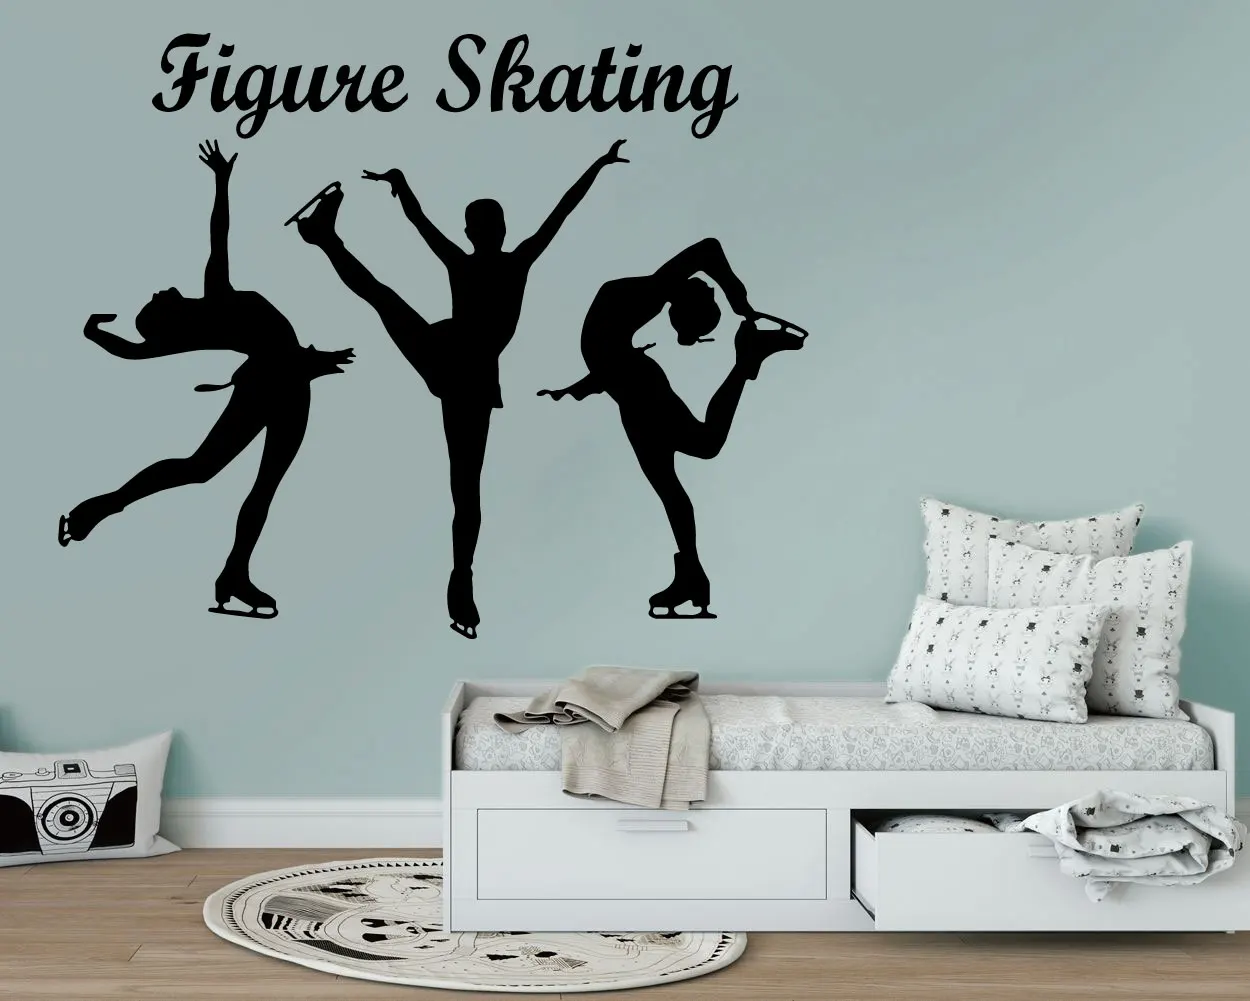 Figure Skating Girl Wall Personalized Customized Name Decal Vinyl Sticker Ice Skating Sport Decor Room Decoration 3YD8